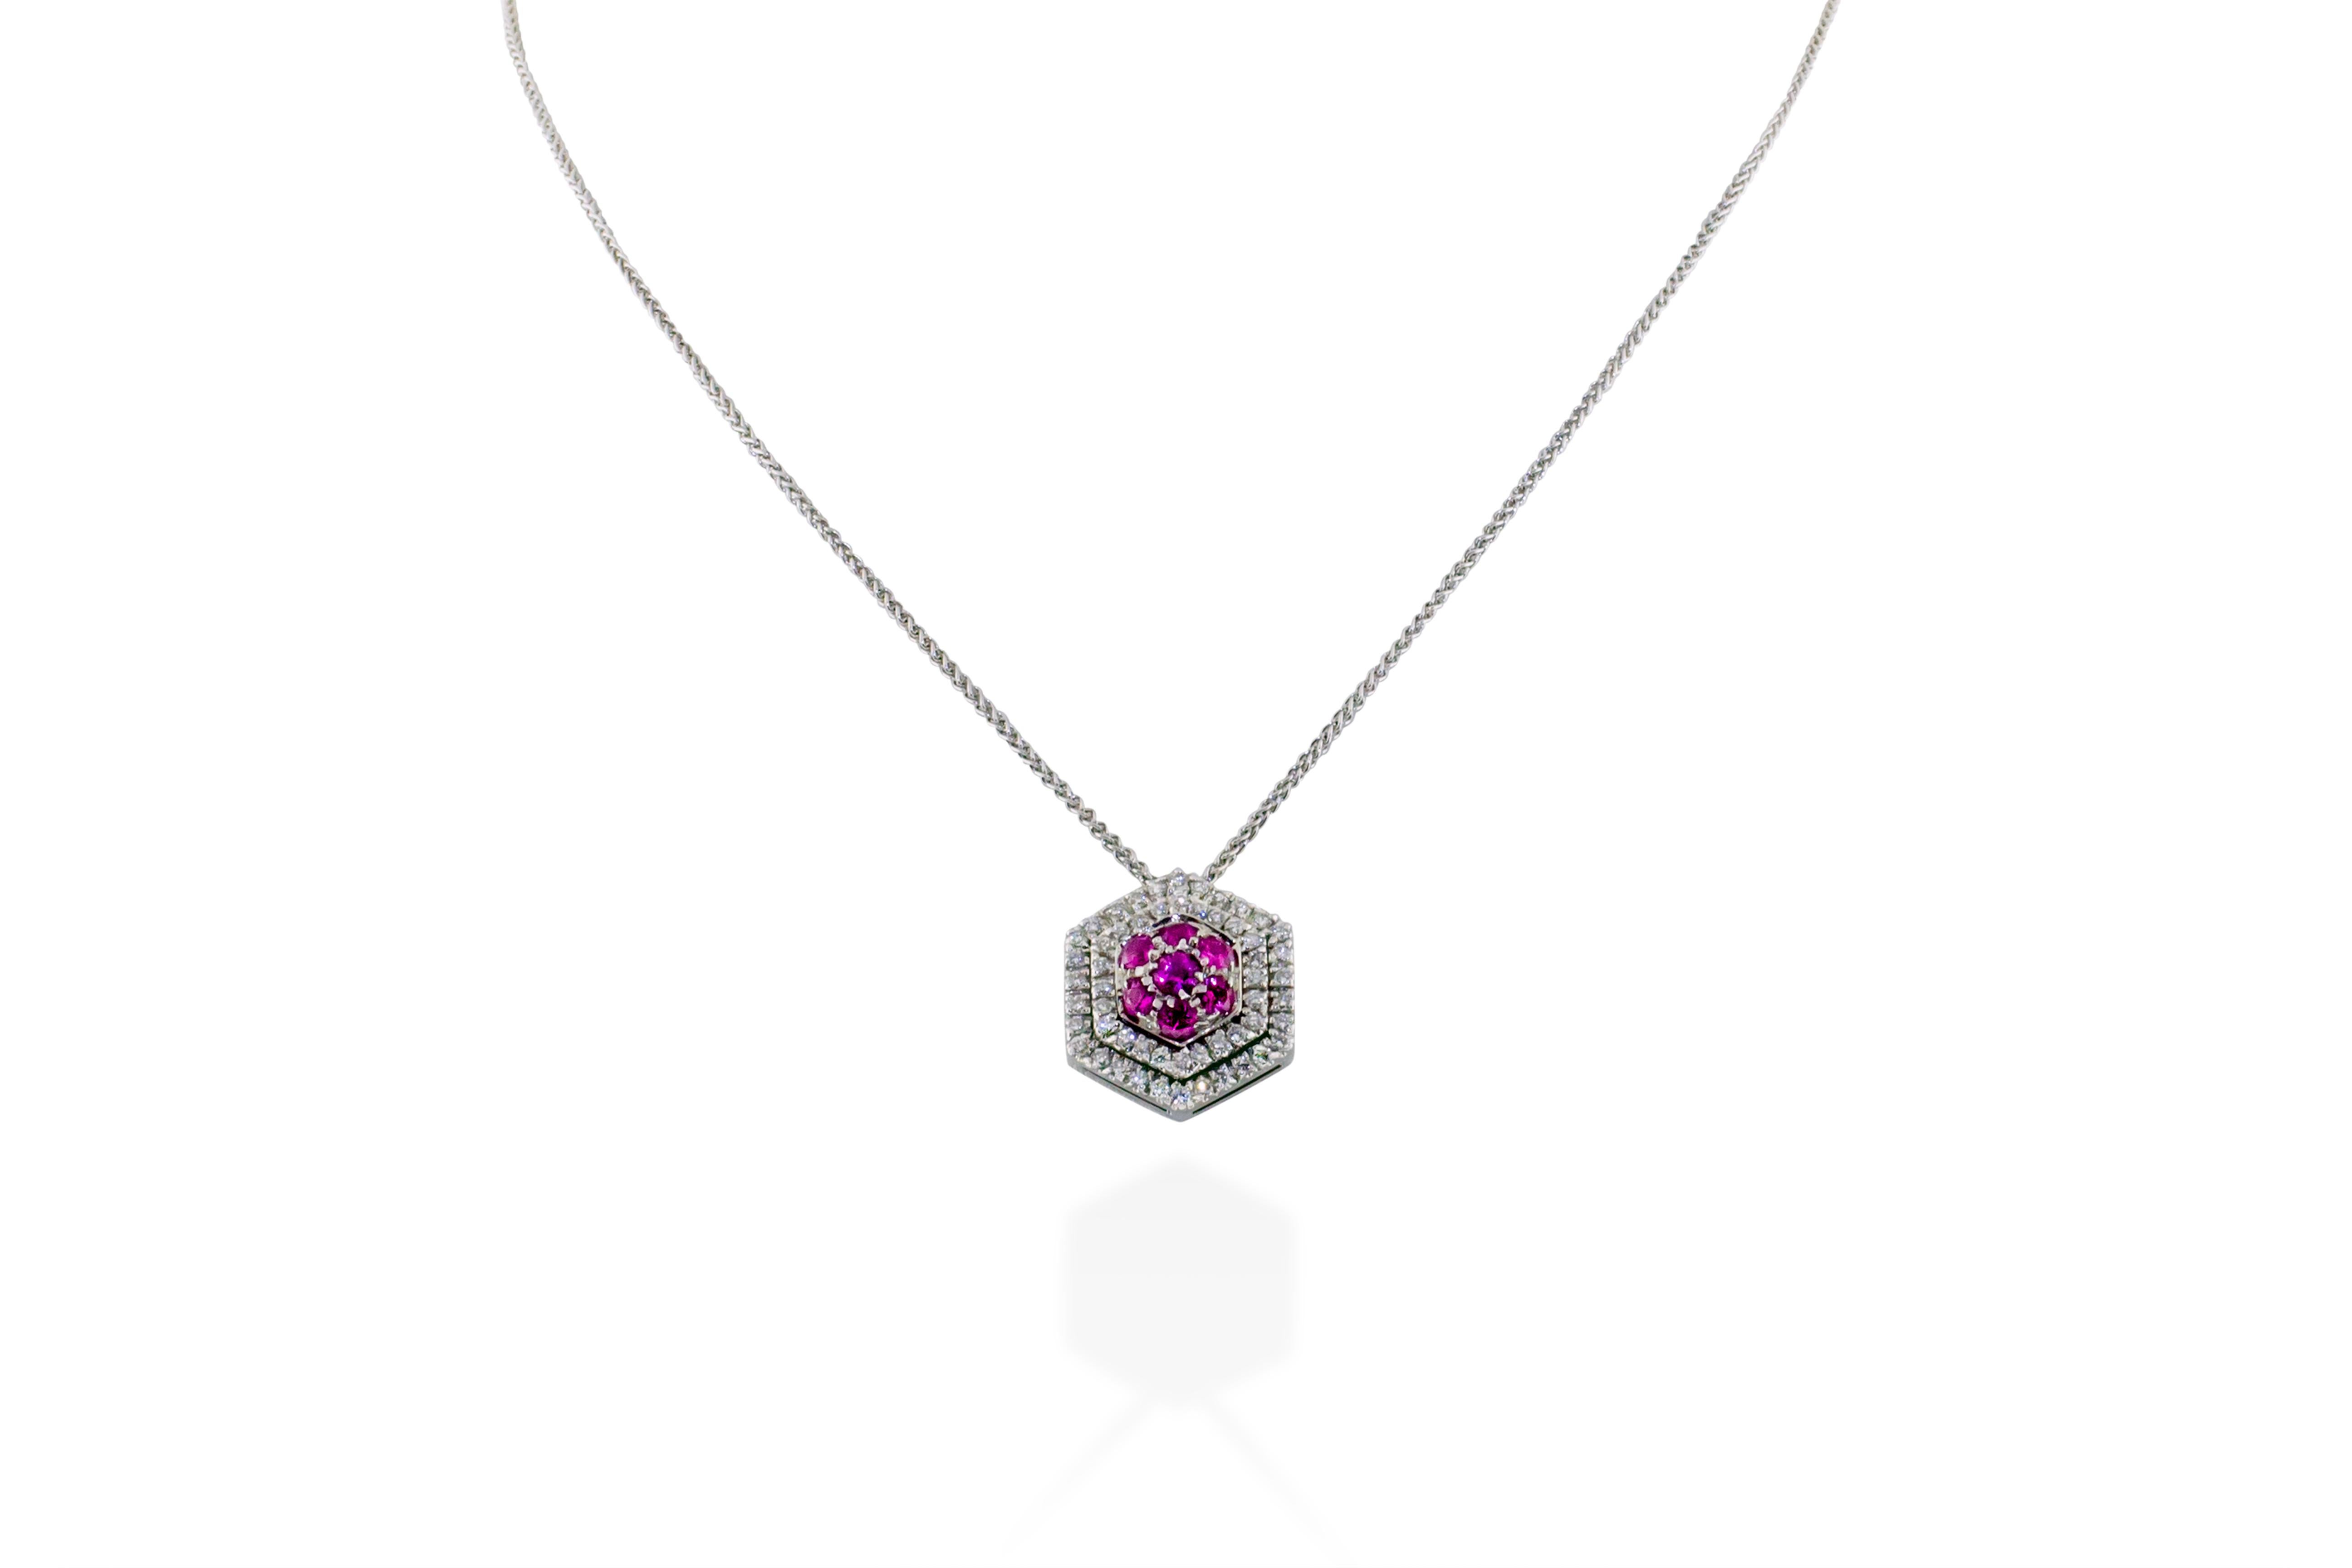 This necklace features a pendant containing 1 carat of G-H VS diamonds set alongside pink sapphires in 5 grams of 18K gold. Chain drop is approximately 8 inches. Made in Italy. 


Viewings available in our NYC showroom by appointment.

